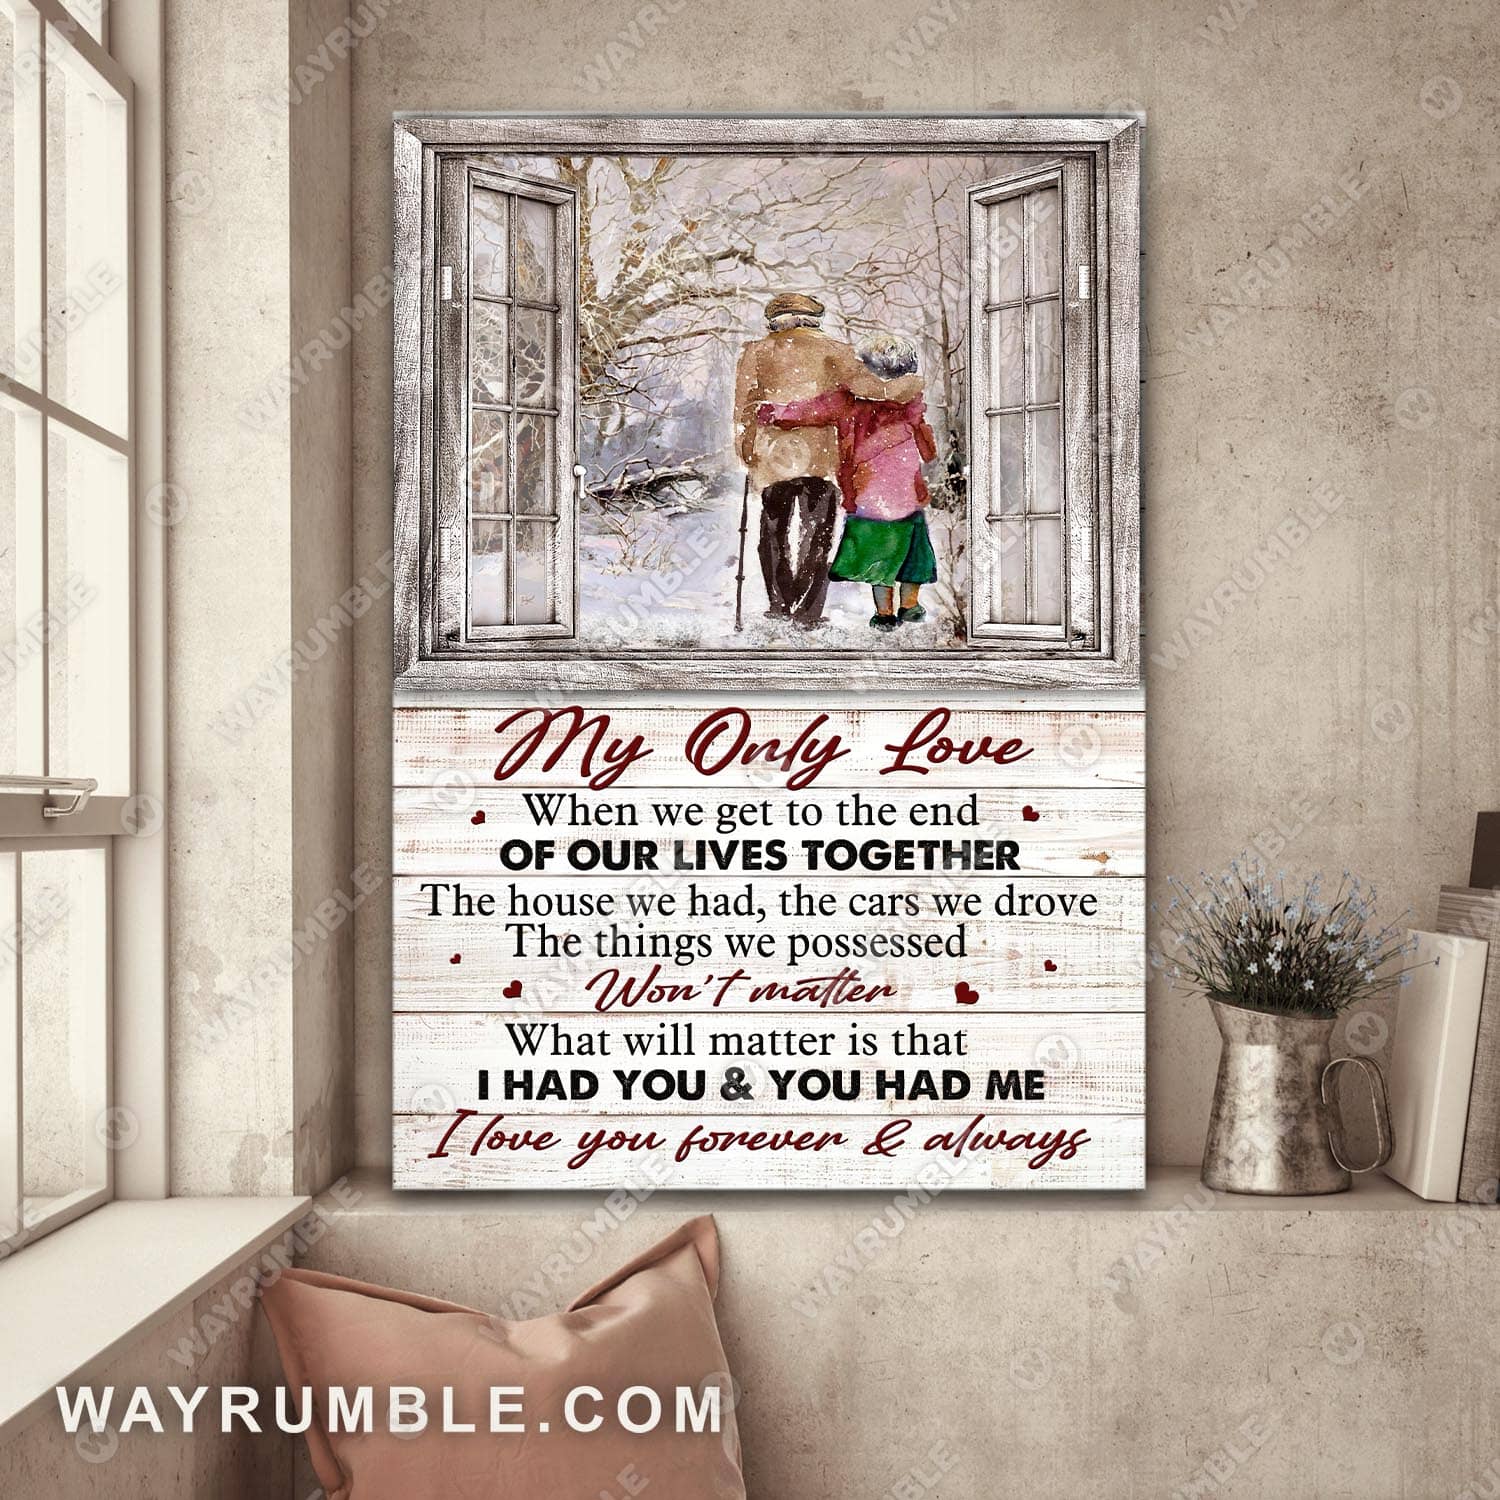 Old couple walking, Winter painting, I love you forever and always - Couple Portrait Canvas Prints, Wall Art